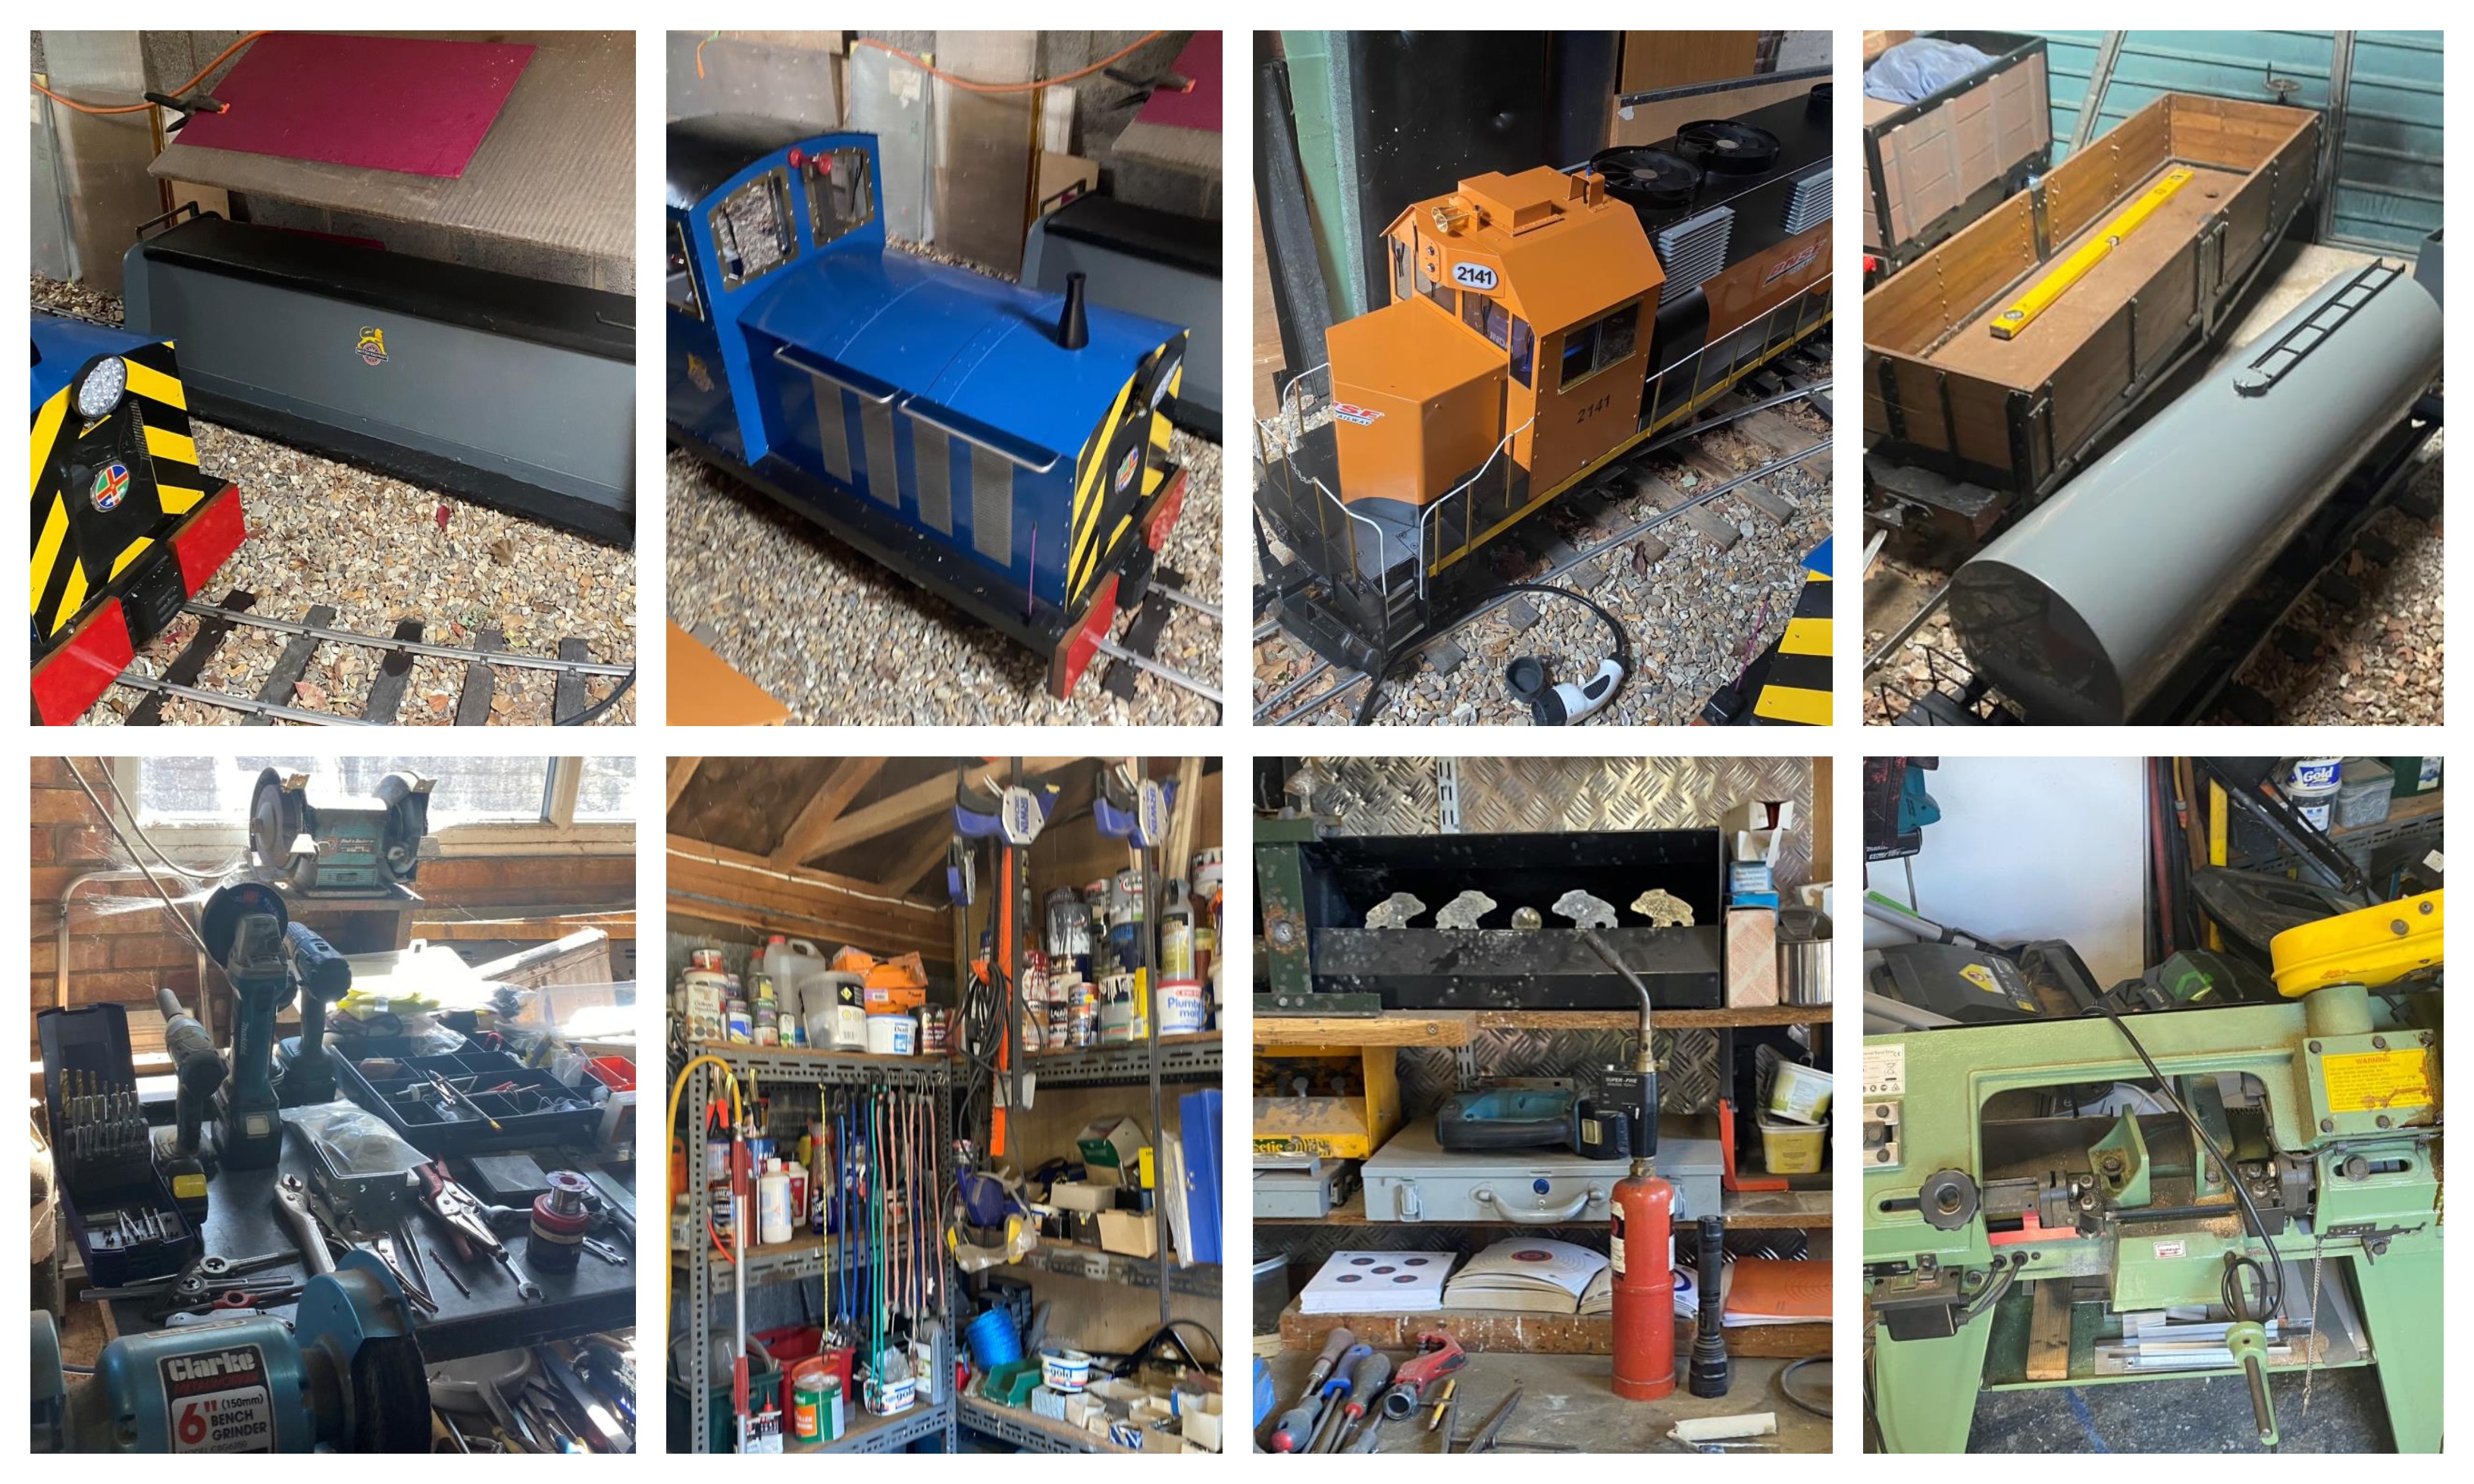 Fabulous Engineering Workshop Coming to Auction, including Full-Scale Electric and Steam Engines, Accessories and Equipment for Building Trains